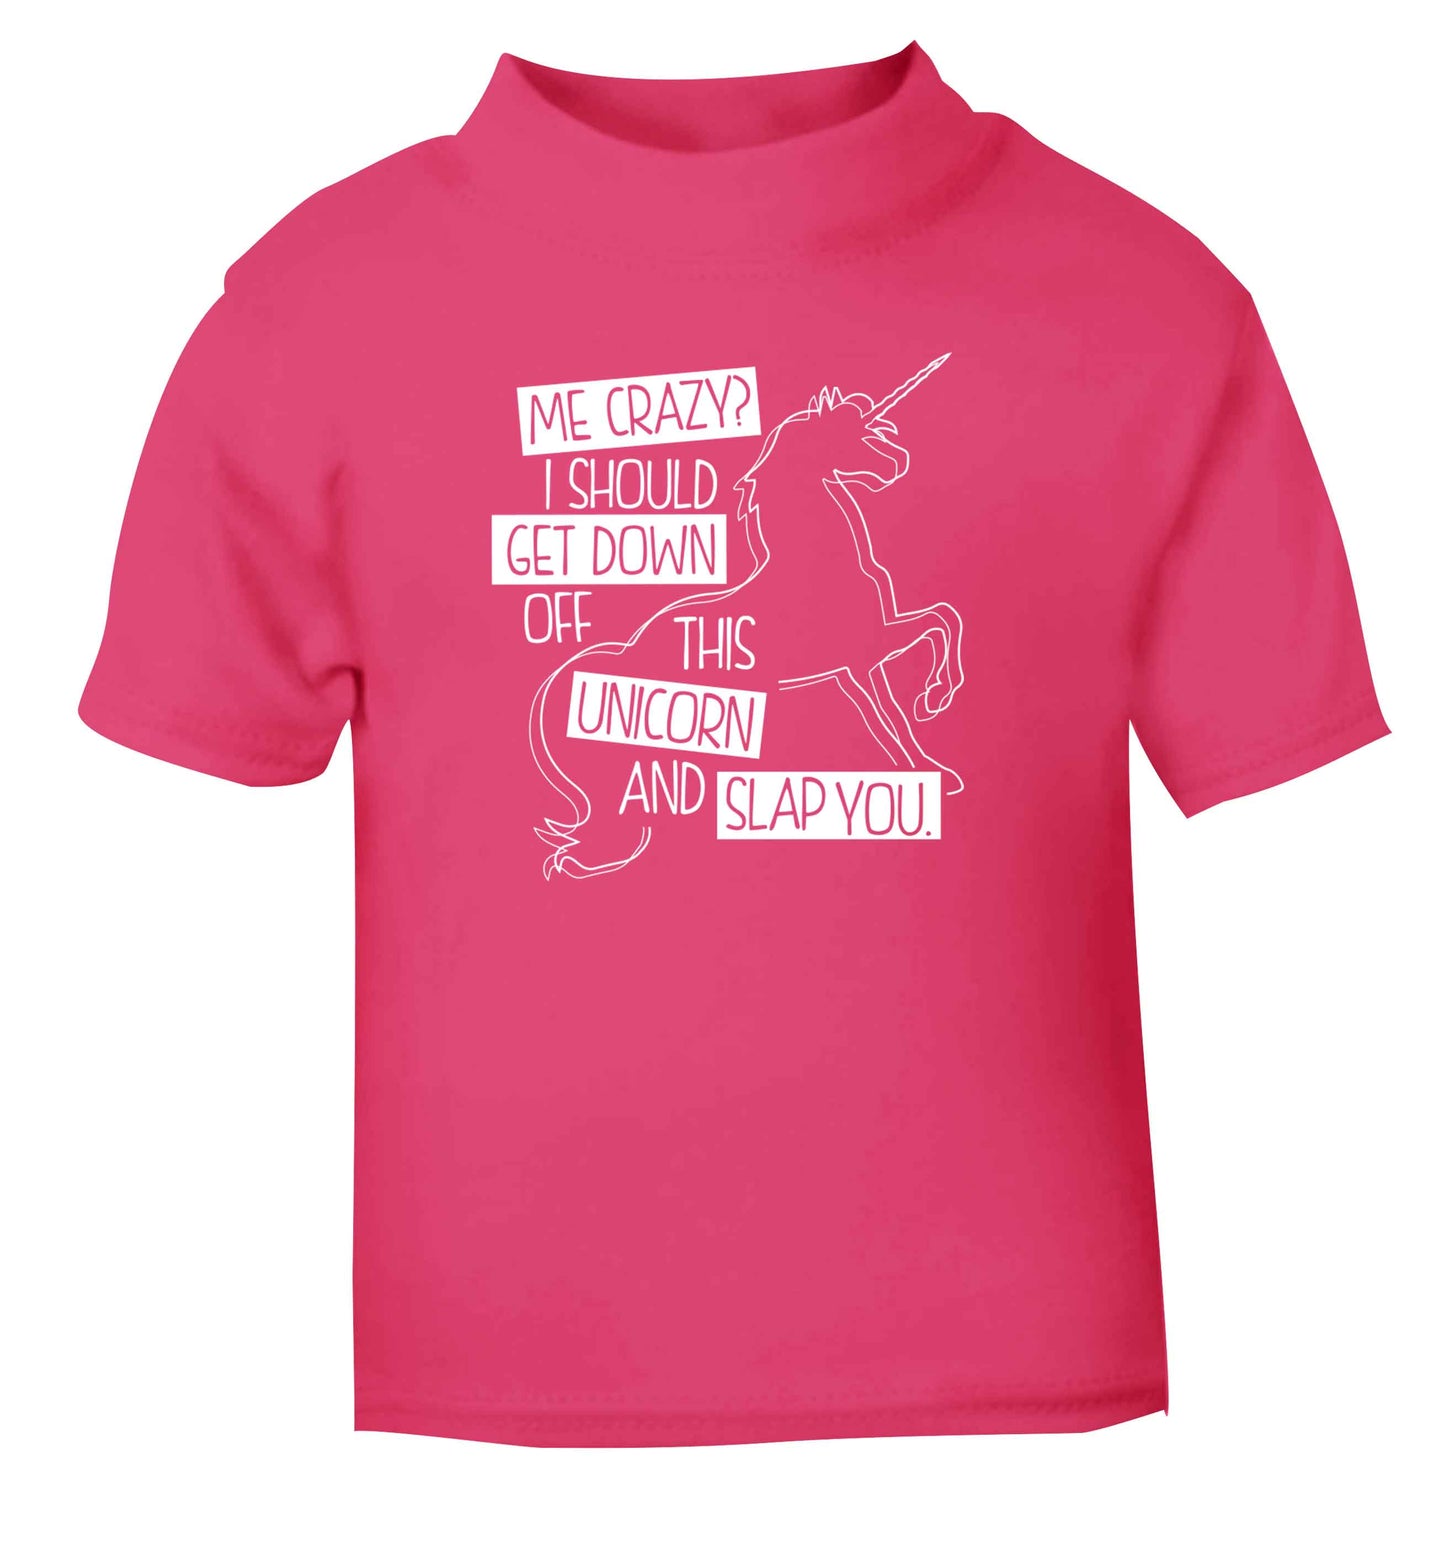 Me crazy? I should get down off this unicorn and slap you pink Baby Toddler Tshirt 2 Years